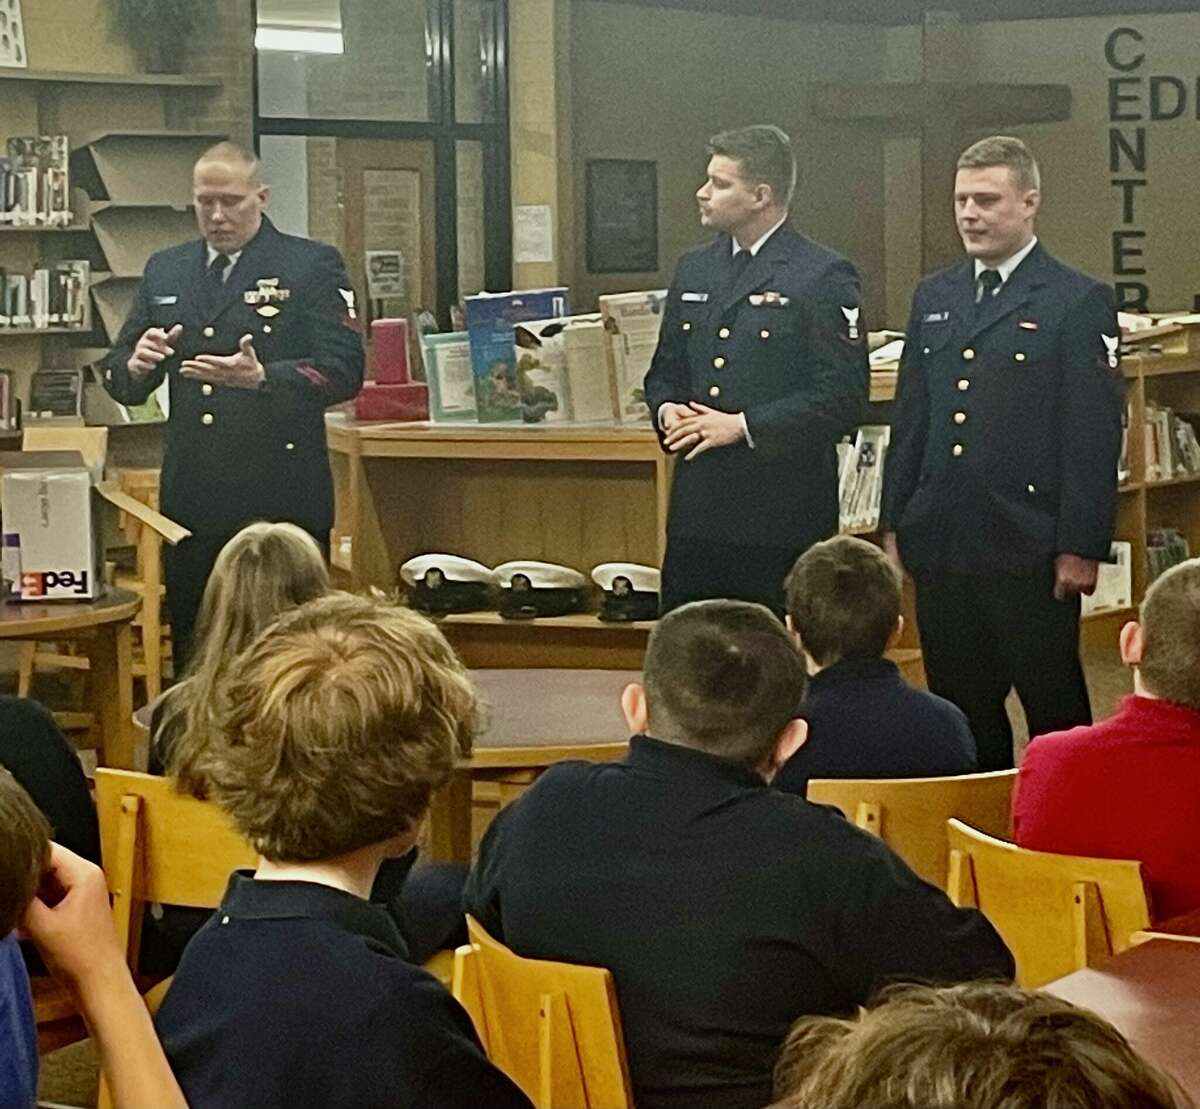 Members of the U.S. Coast Guard visited Manistee Catholic Central.